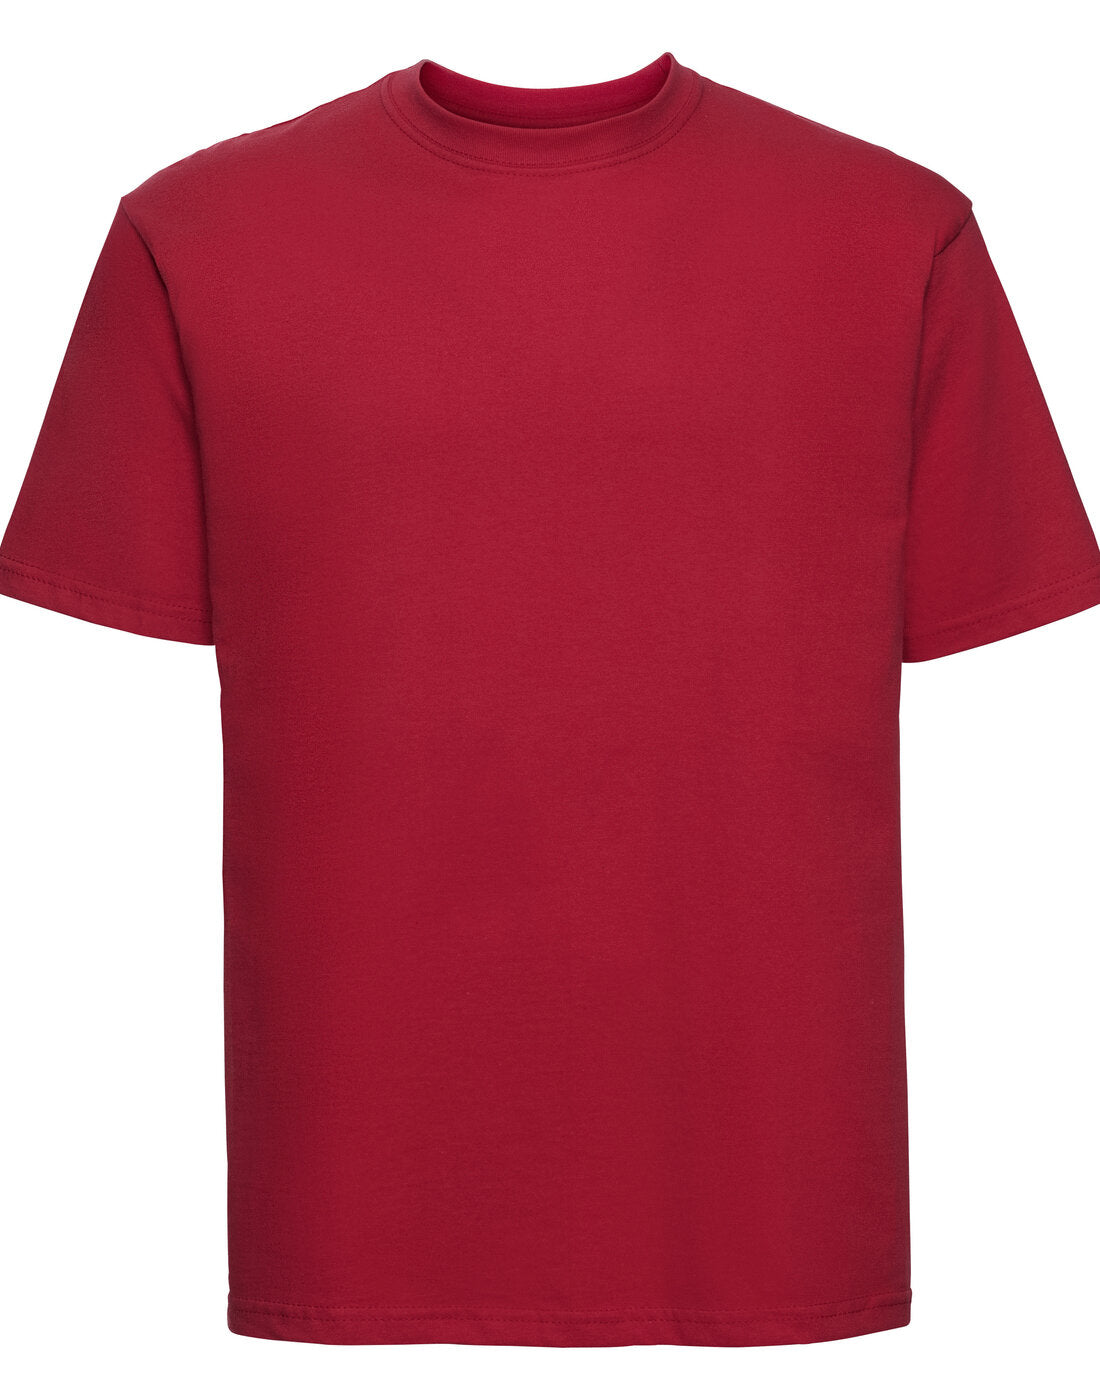 Russell Classic Unisex T-Shirt - Classic Red